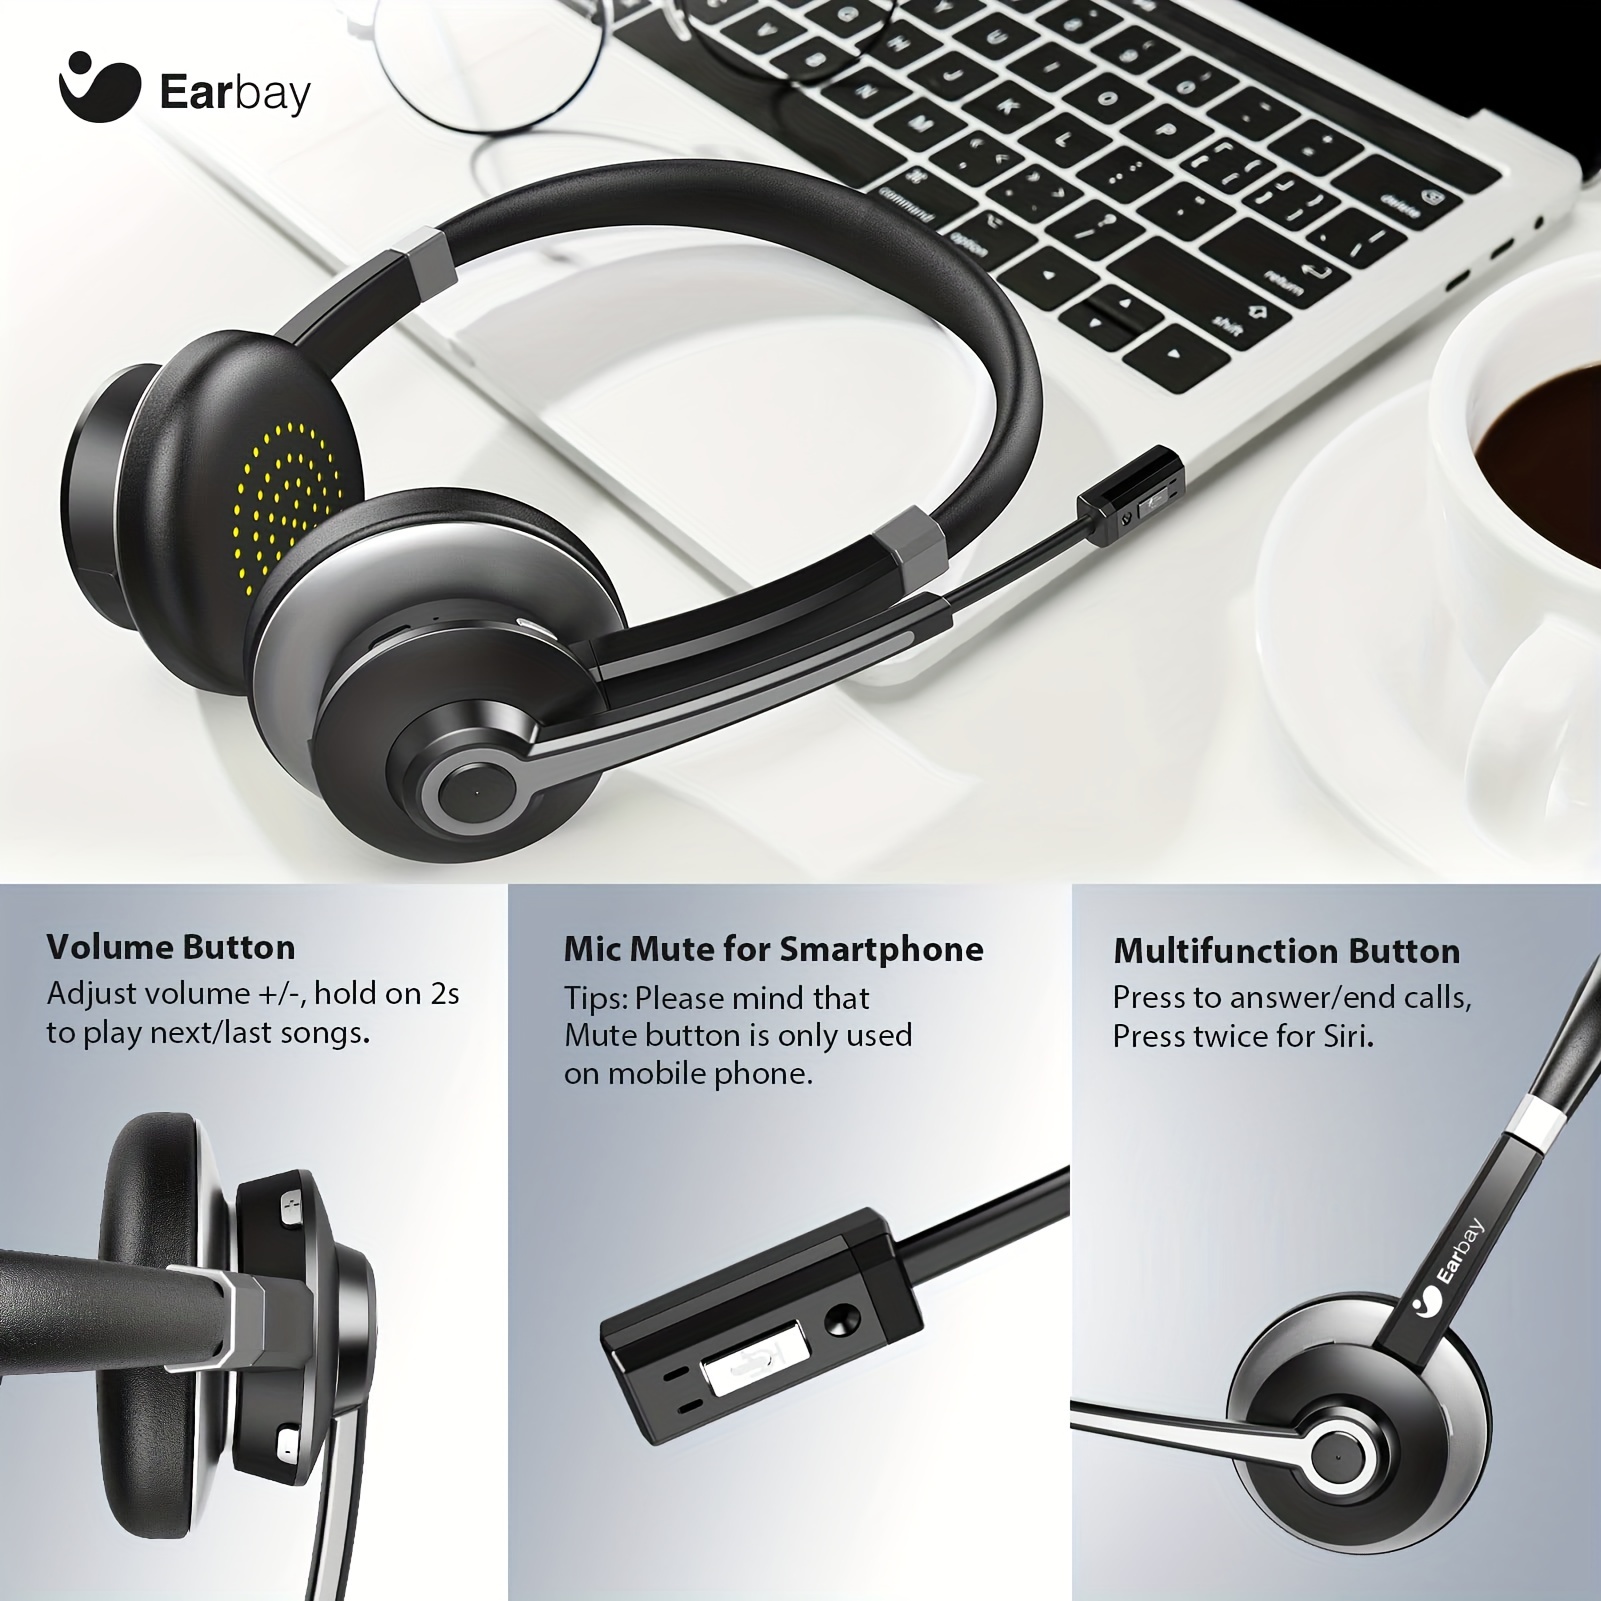 

Headset With Microphone, Wireless Headphones With Microphone Noise Cancelling V5.0, 26h Talk Time, Wireless Headset With Mute For Computer, Meetings, Office, Work, Call Center